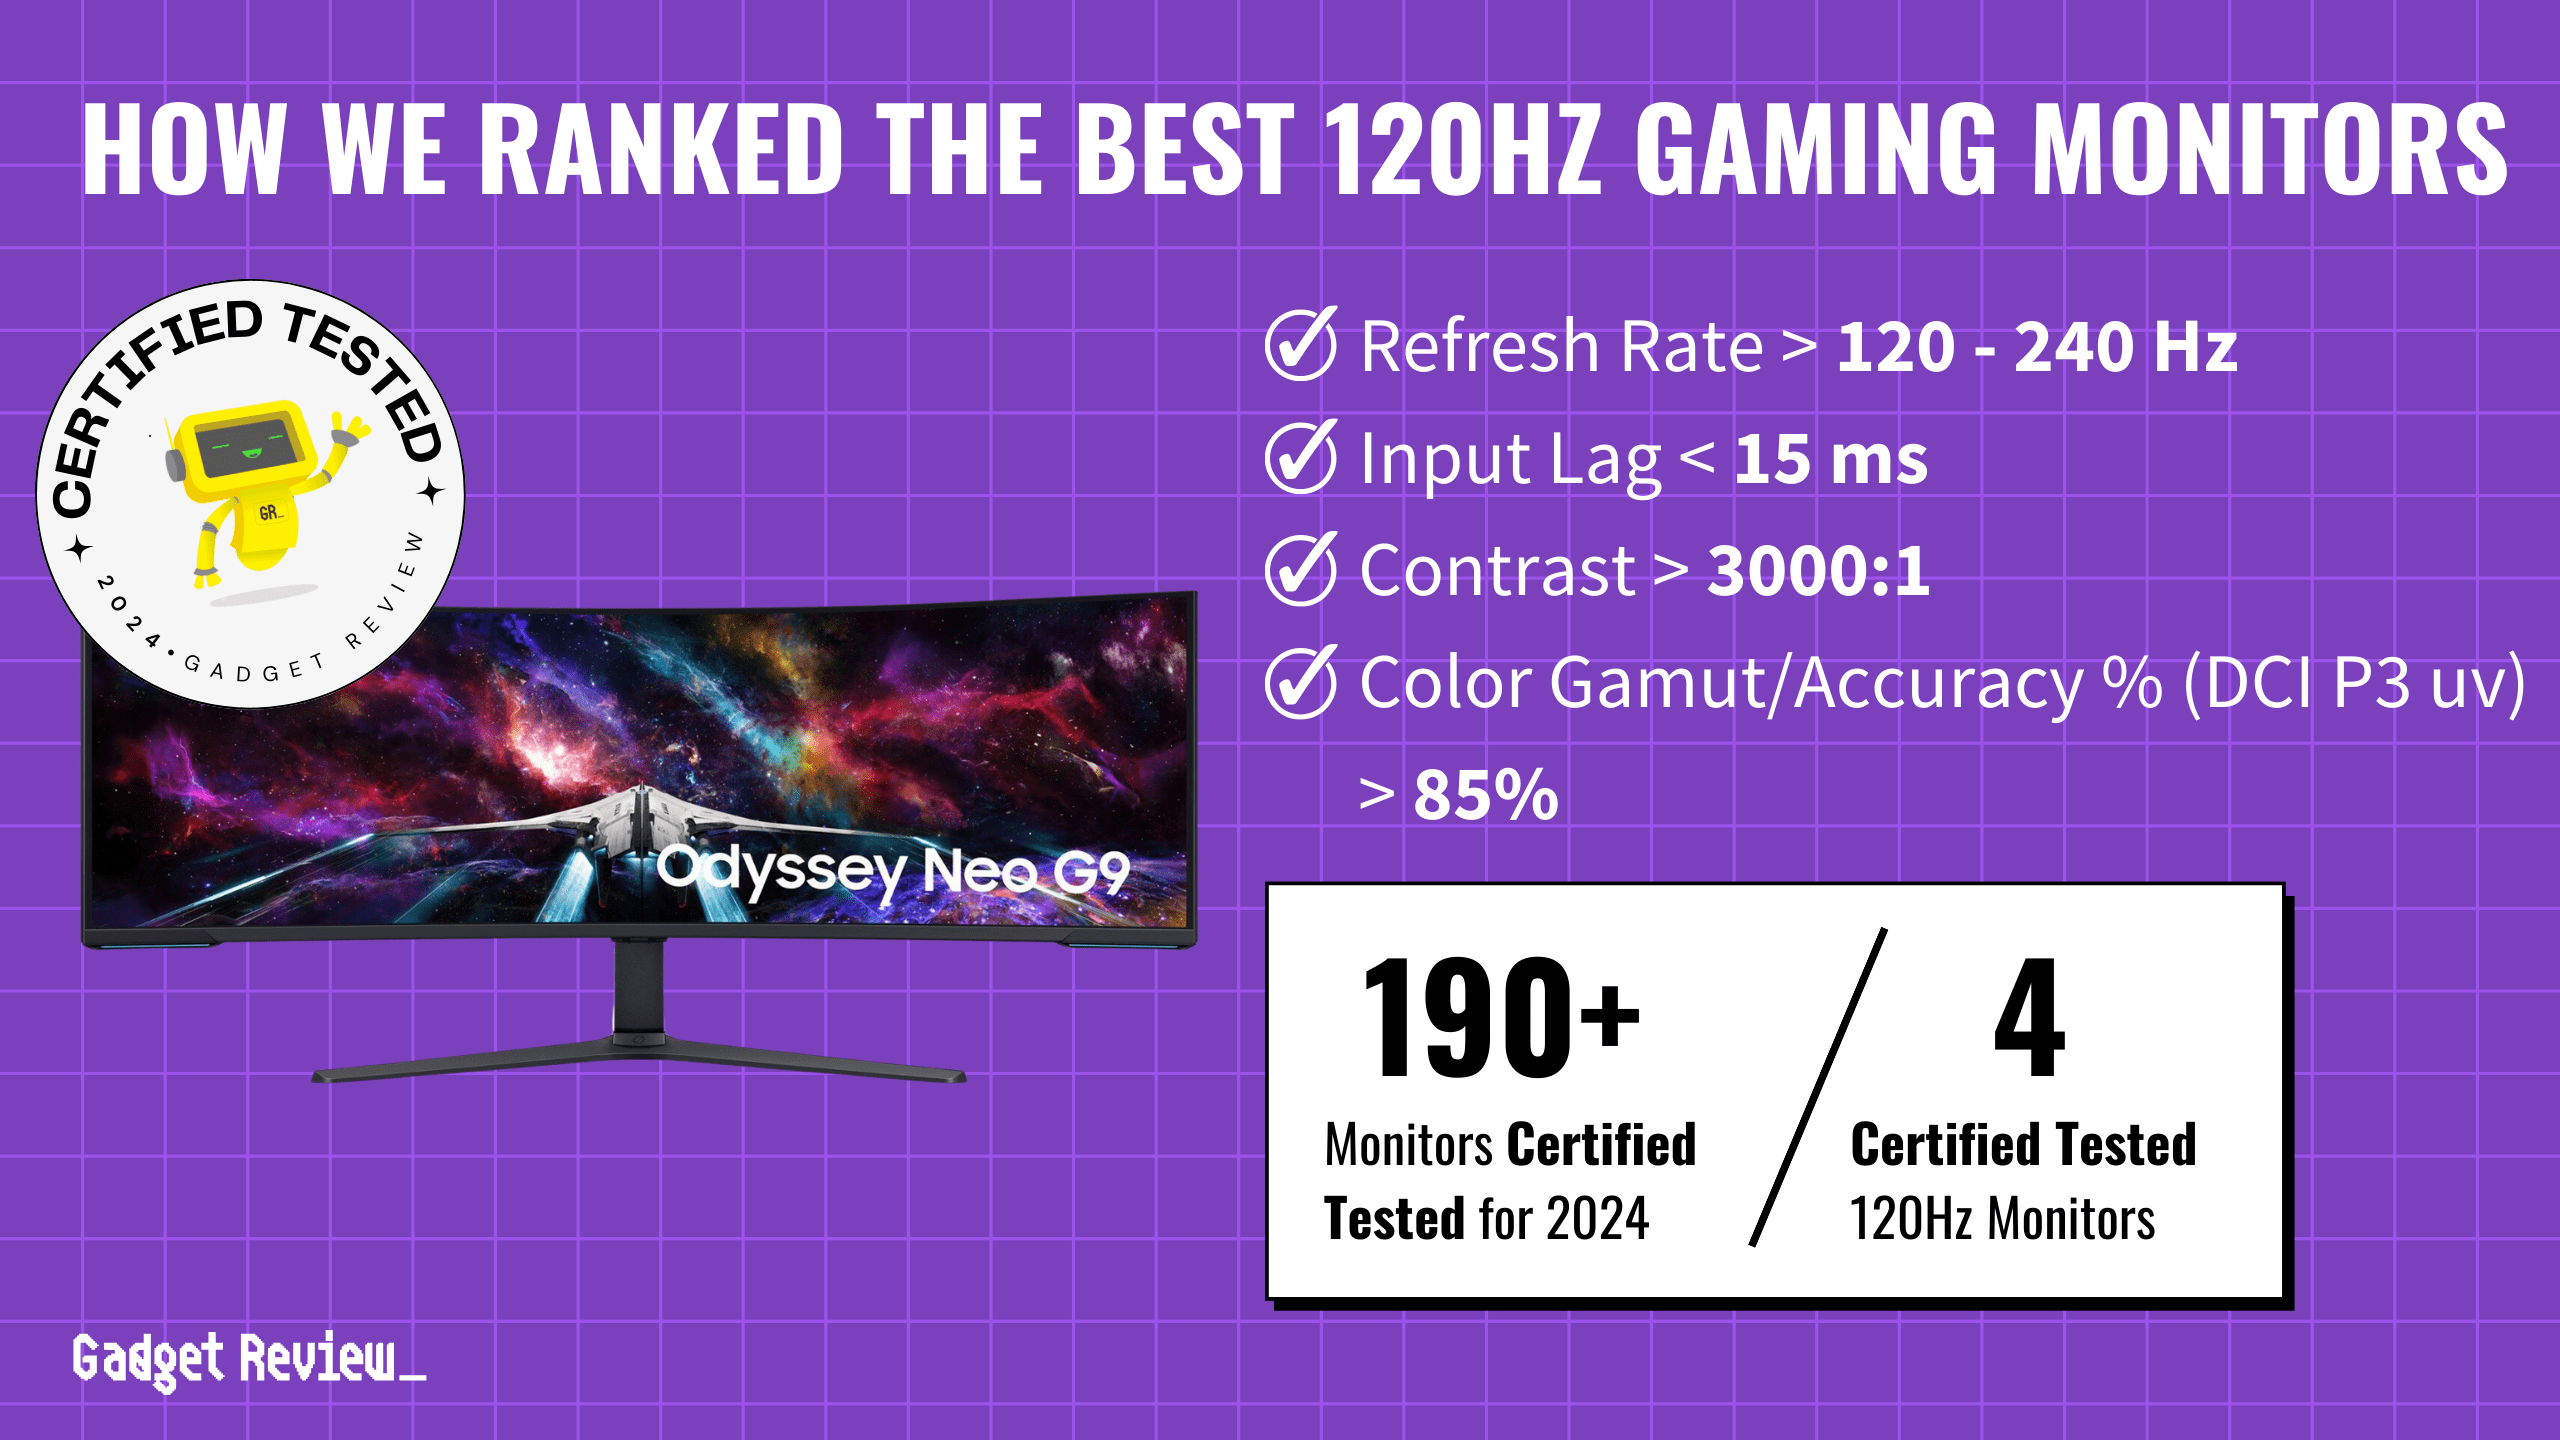 best 120hz gaming monitors guide that shows the top best gaming monitor model